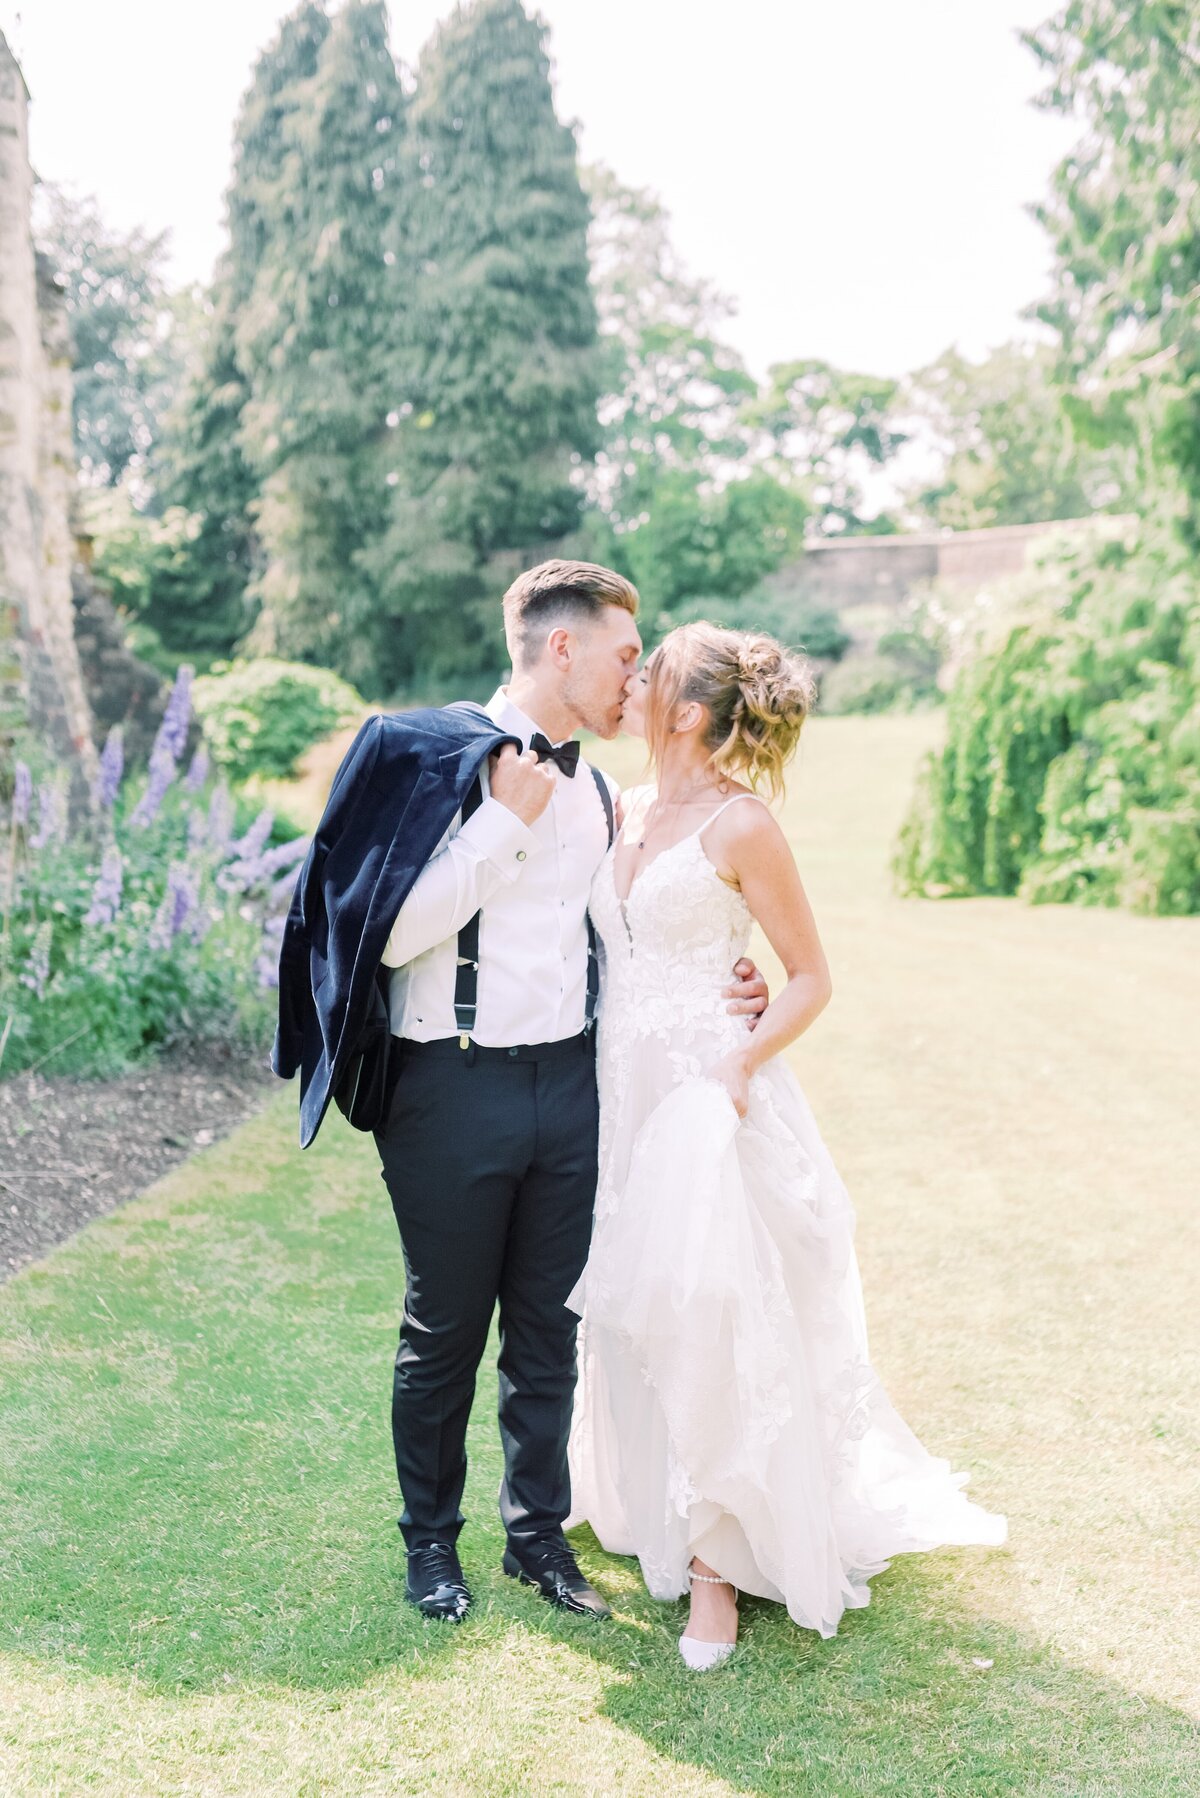 Light and airy style image of a bride and groom walking together, they have stopped for a kiss. The groom is in a black tuxedo and the bride is wearing a thin strap aline lace gown